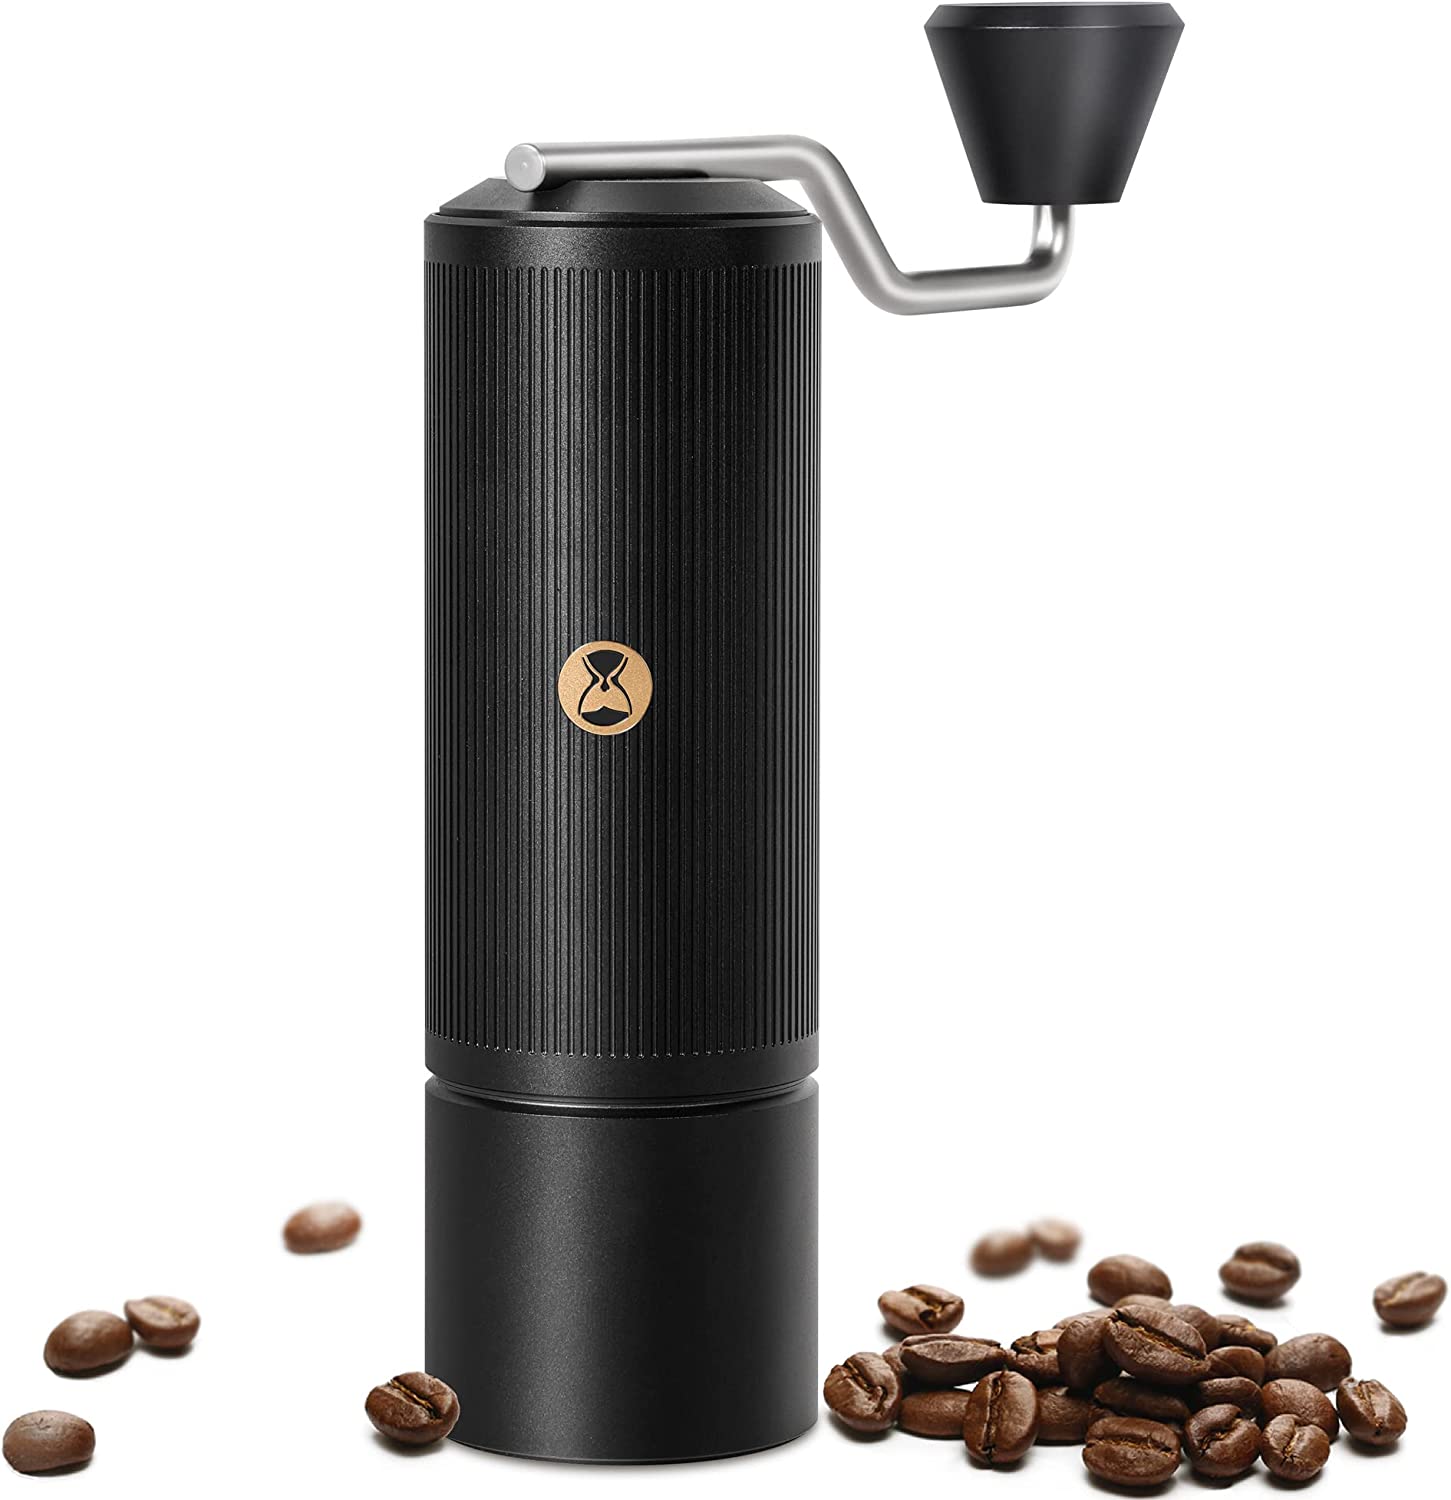 TIMEMORE Premium Manual Coffee Grinder with 42 mm Stainless Steel Cone-Shaped Burr, Hand Coffee Grinder with High Precision, Adjustable Setting, French Press, Coffee for Pouring Mill, Xlite, Black